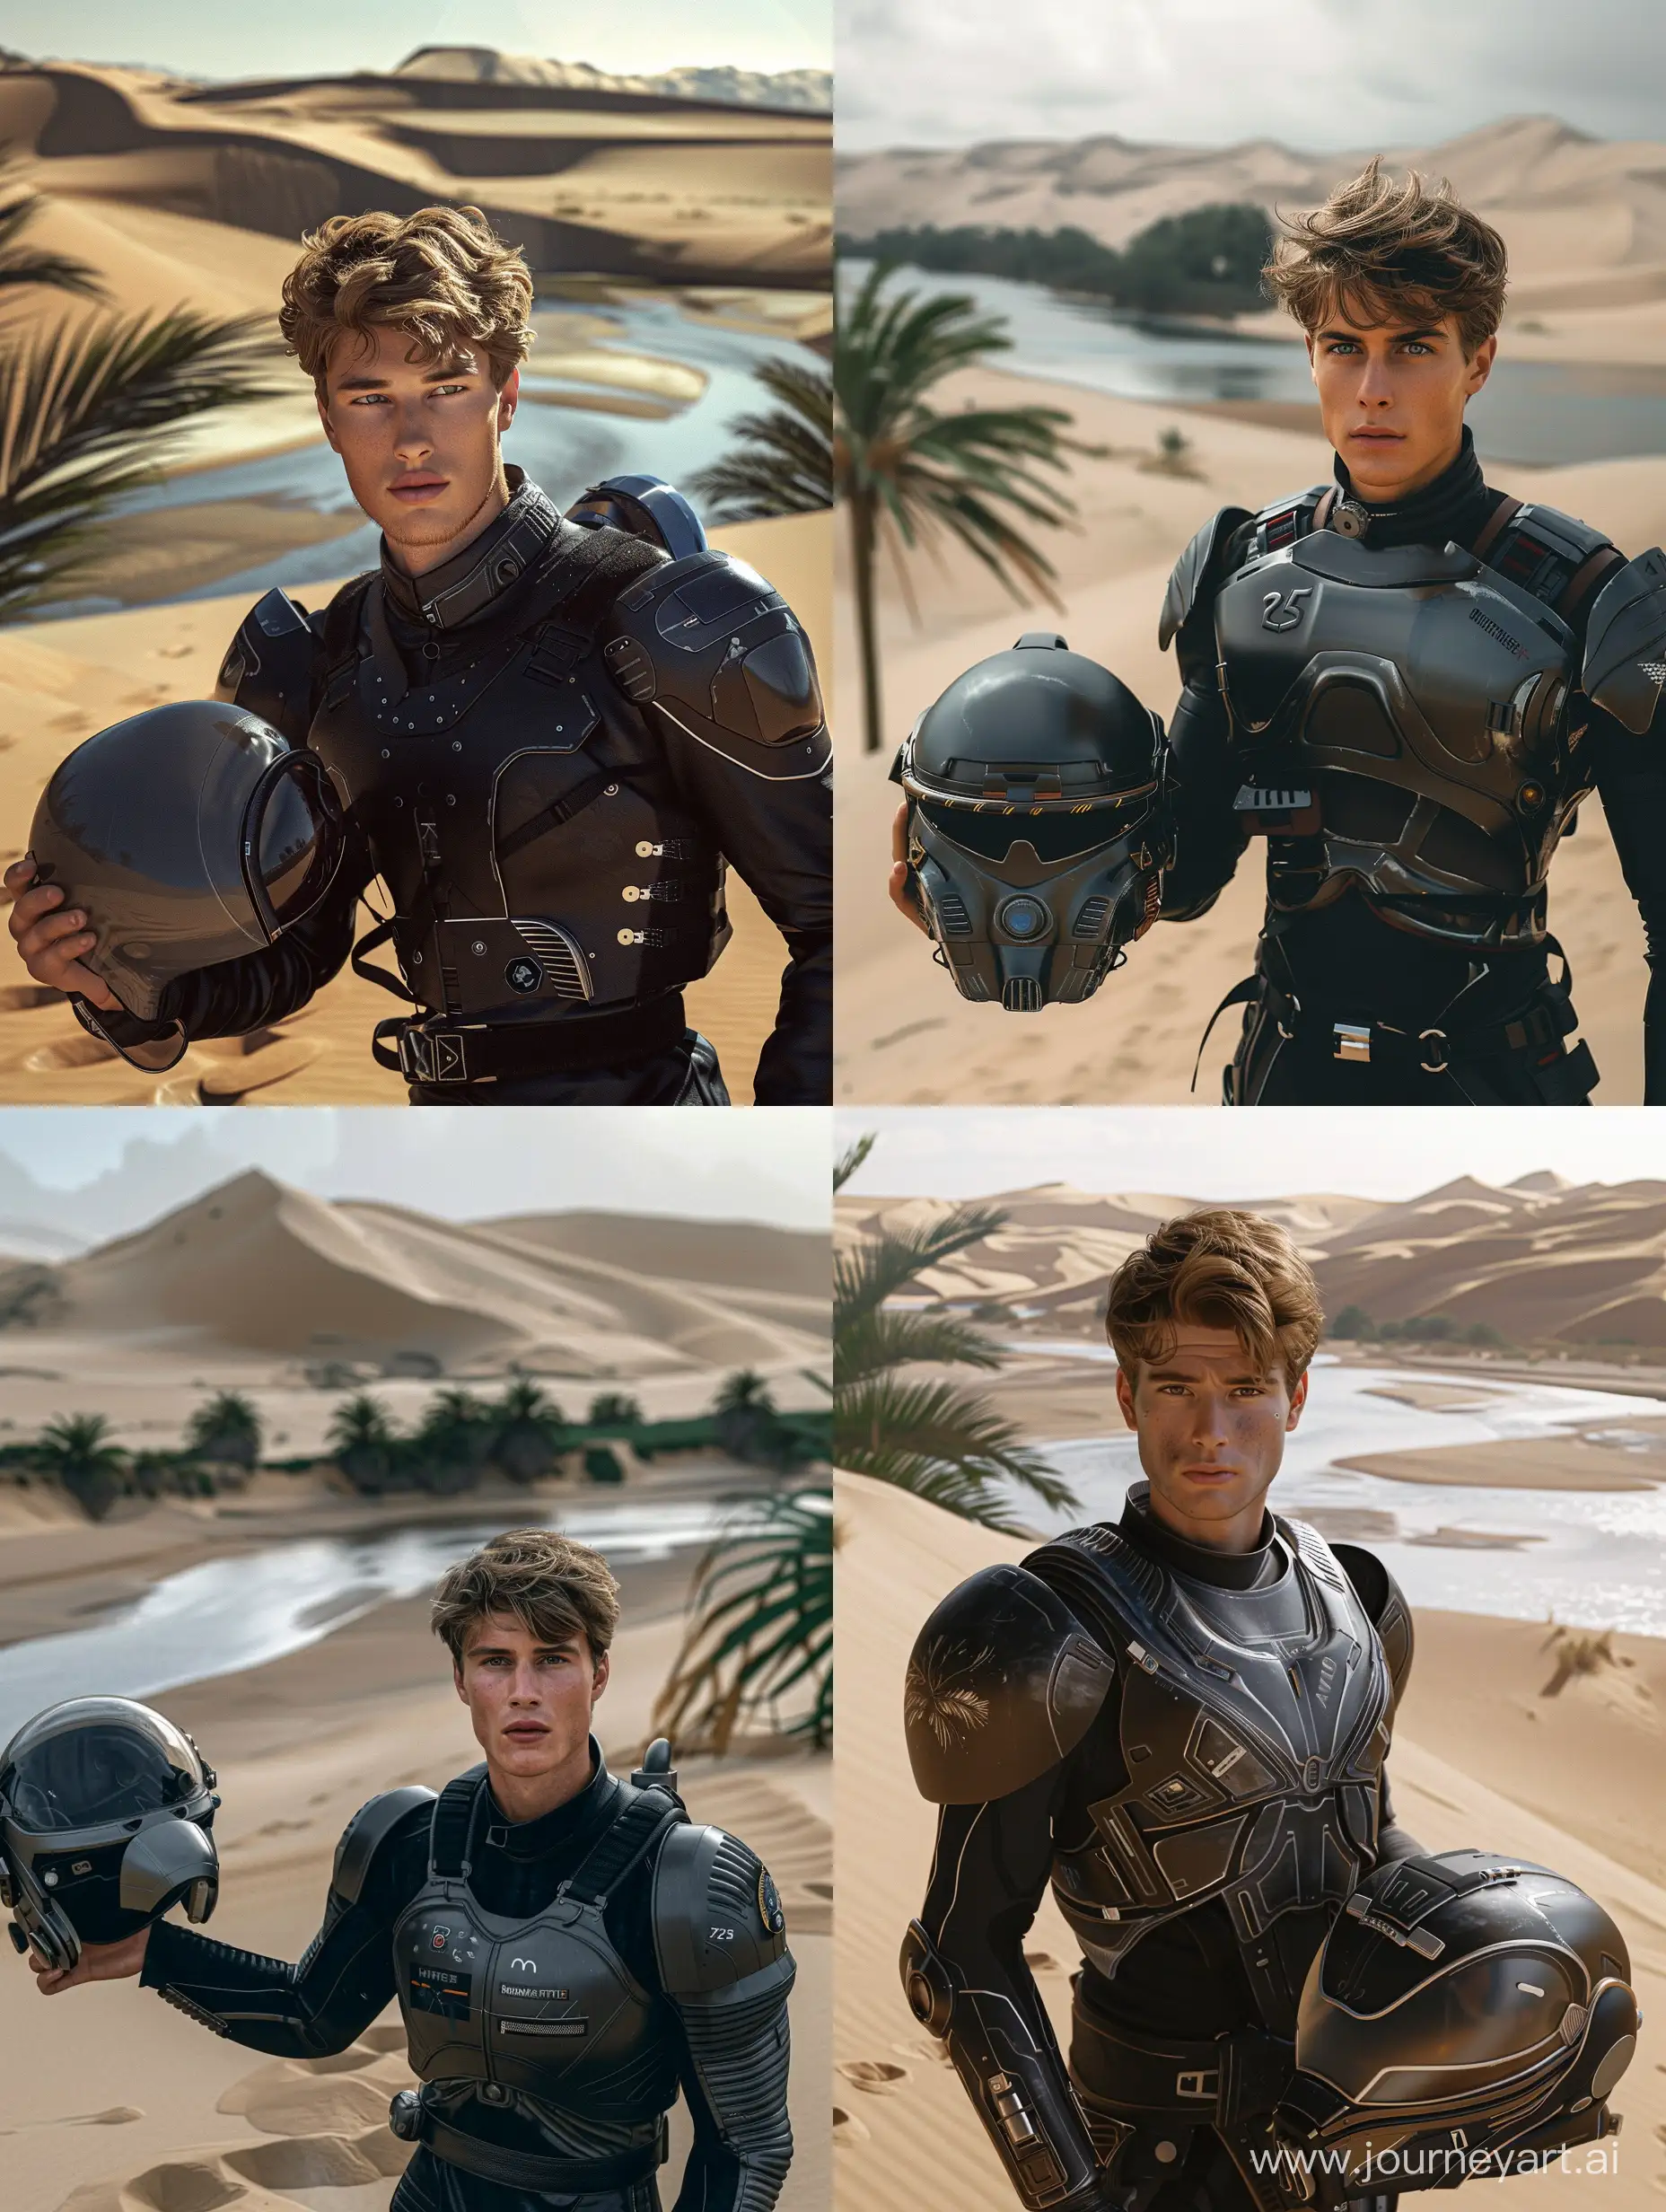 Handsome-Prince-in-Space-Armor-with-Helmet-Amidst-Sand-Dunes-and-Palms